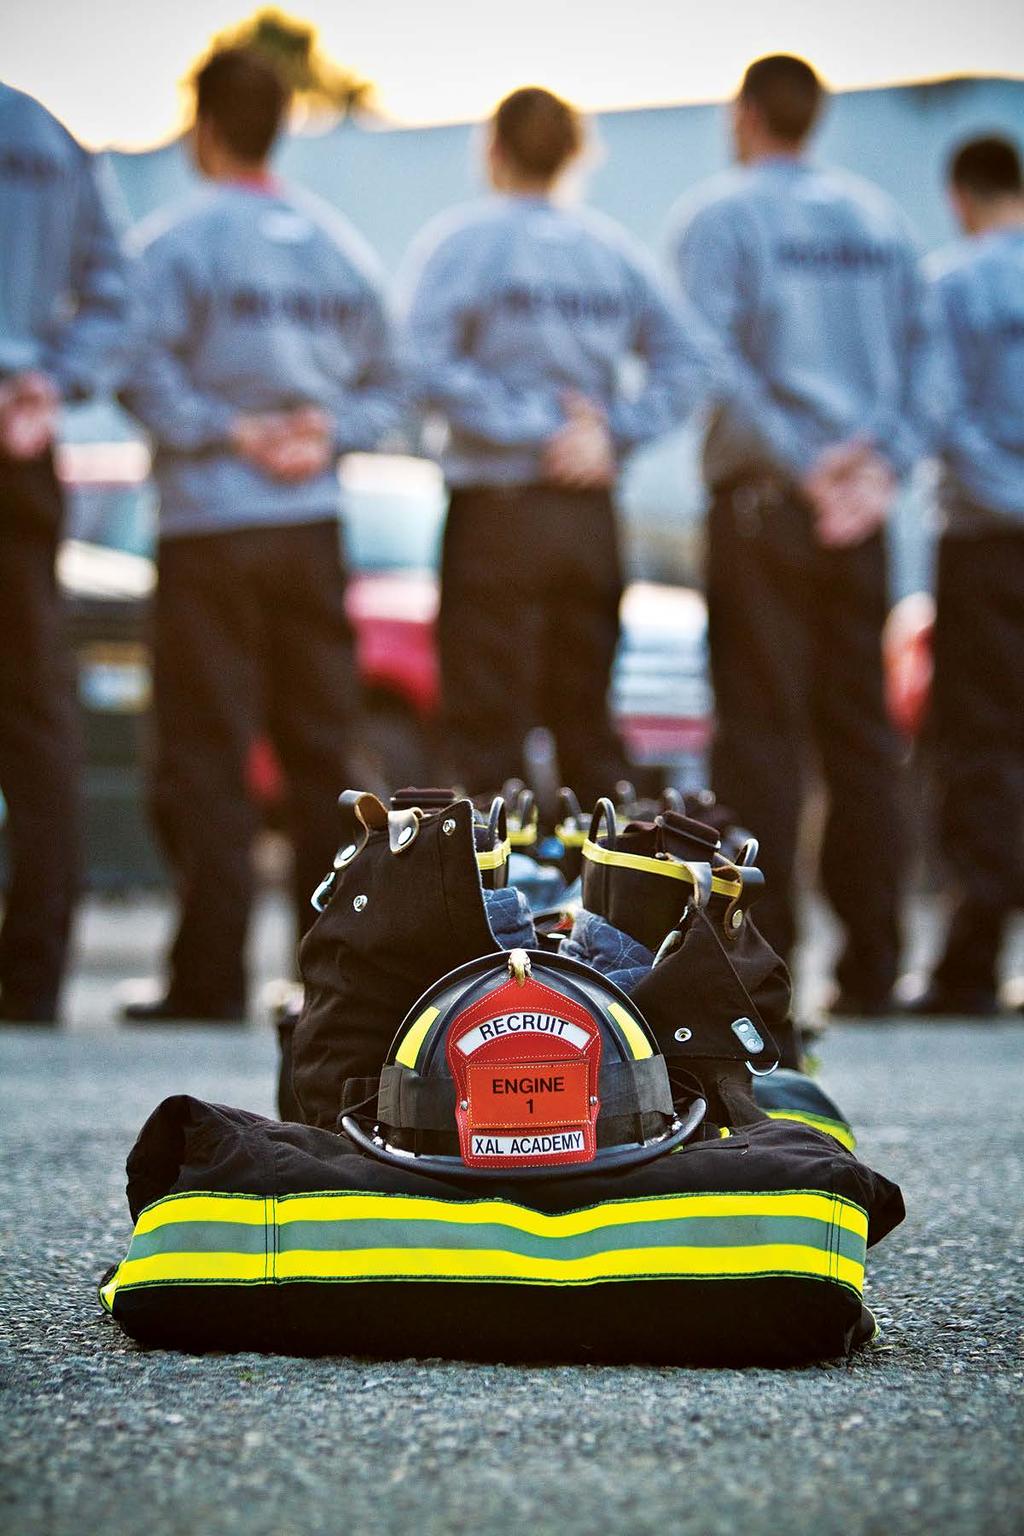 Under close supervision during this Academy, the Recruit must gain understanding of lifesaving and firefighting methods through intensive academic